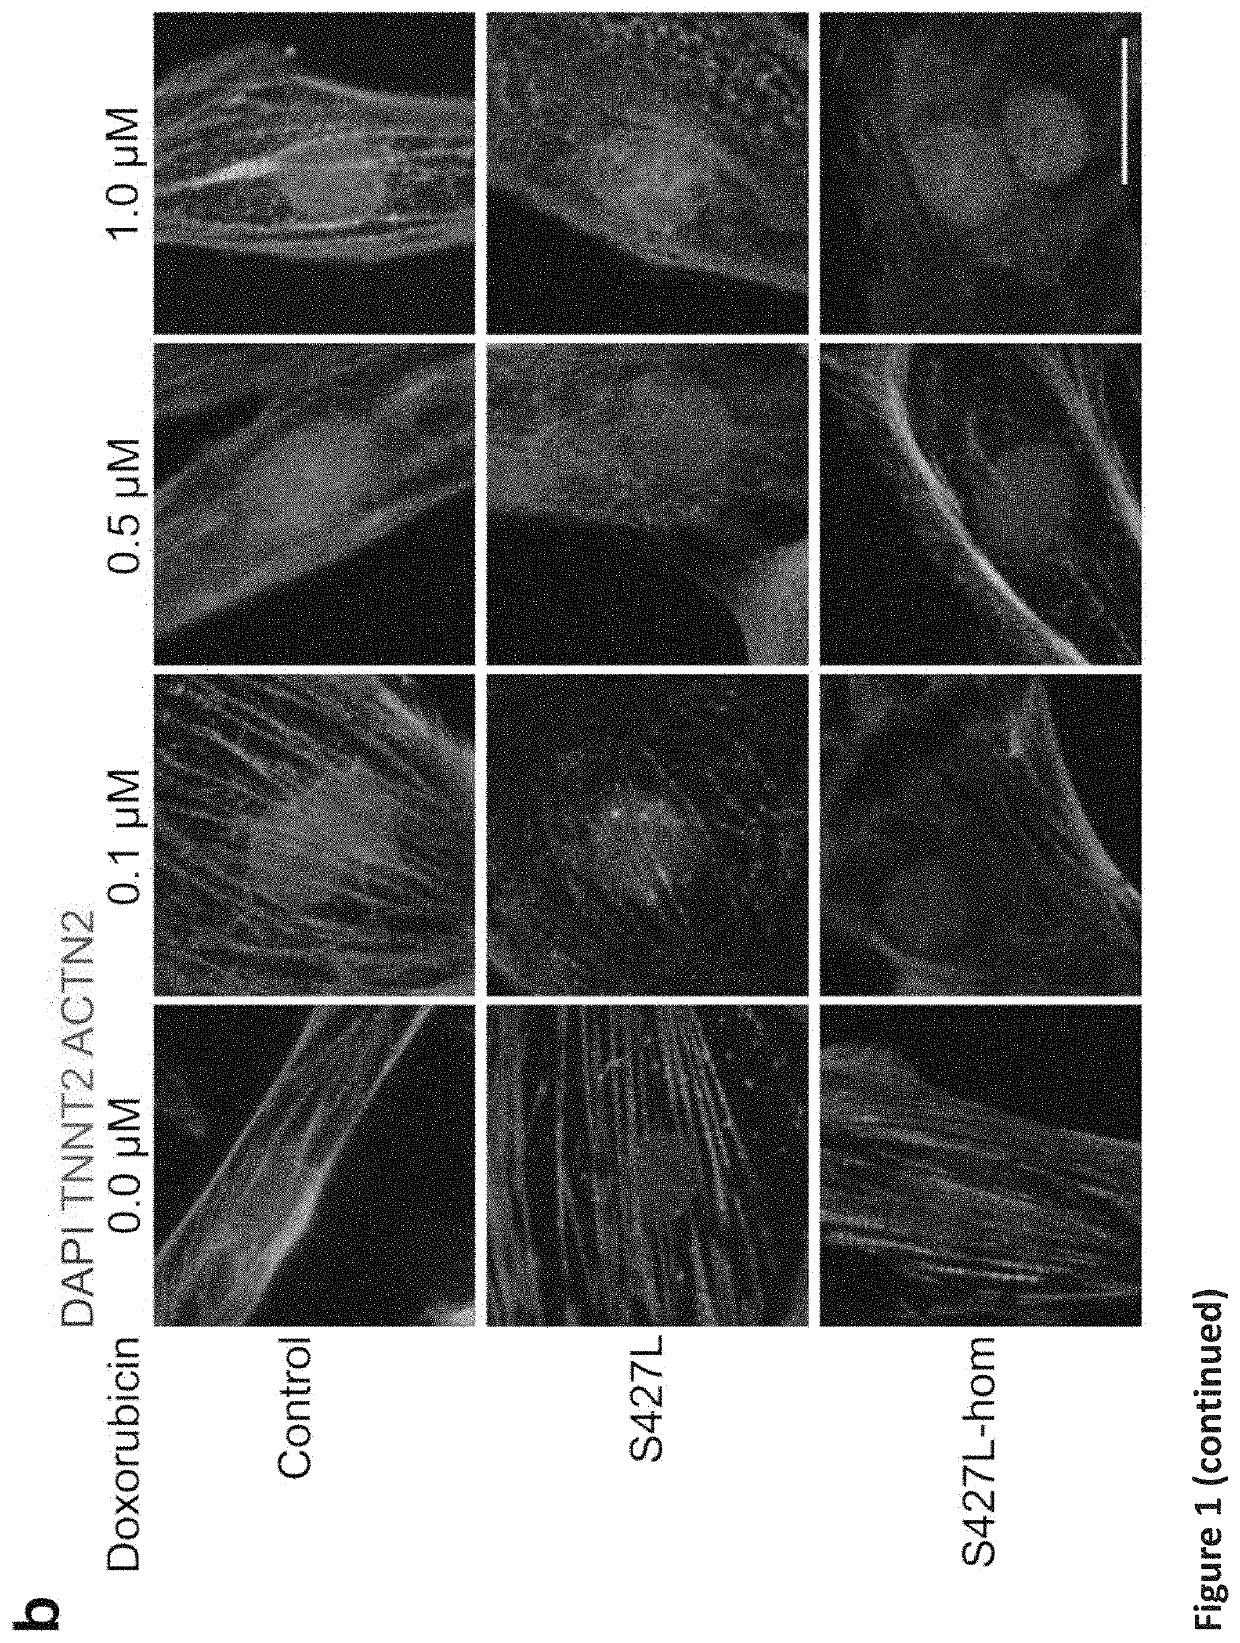 Retinoic acid receptor gamma agonists to attenuate anthracycline-induced cardiotoxicity